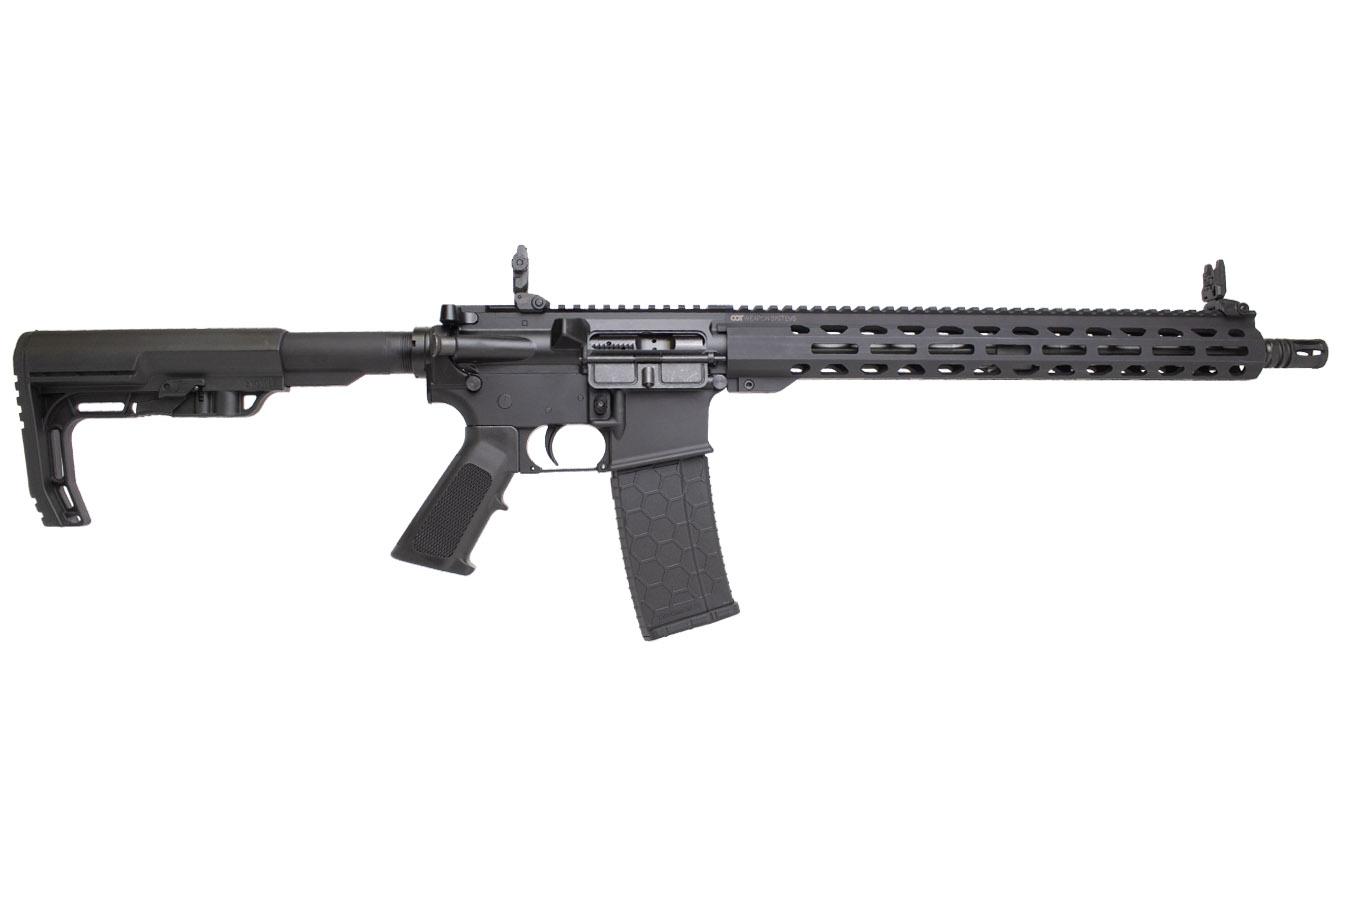 No. 32 Best Selling: CQT WEAPON SYSTEMS CQT15 5.56MM 16` BARREL